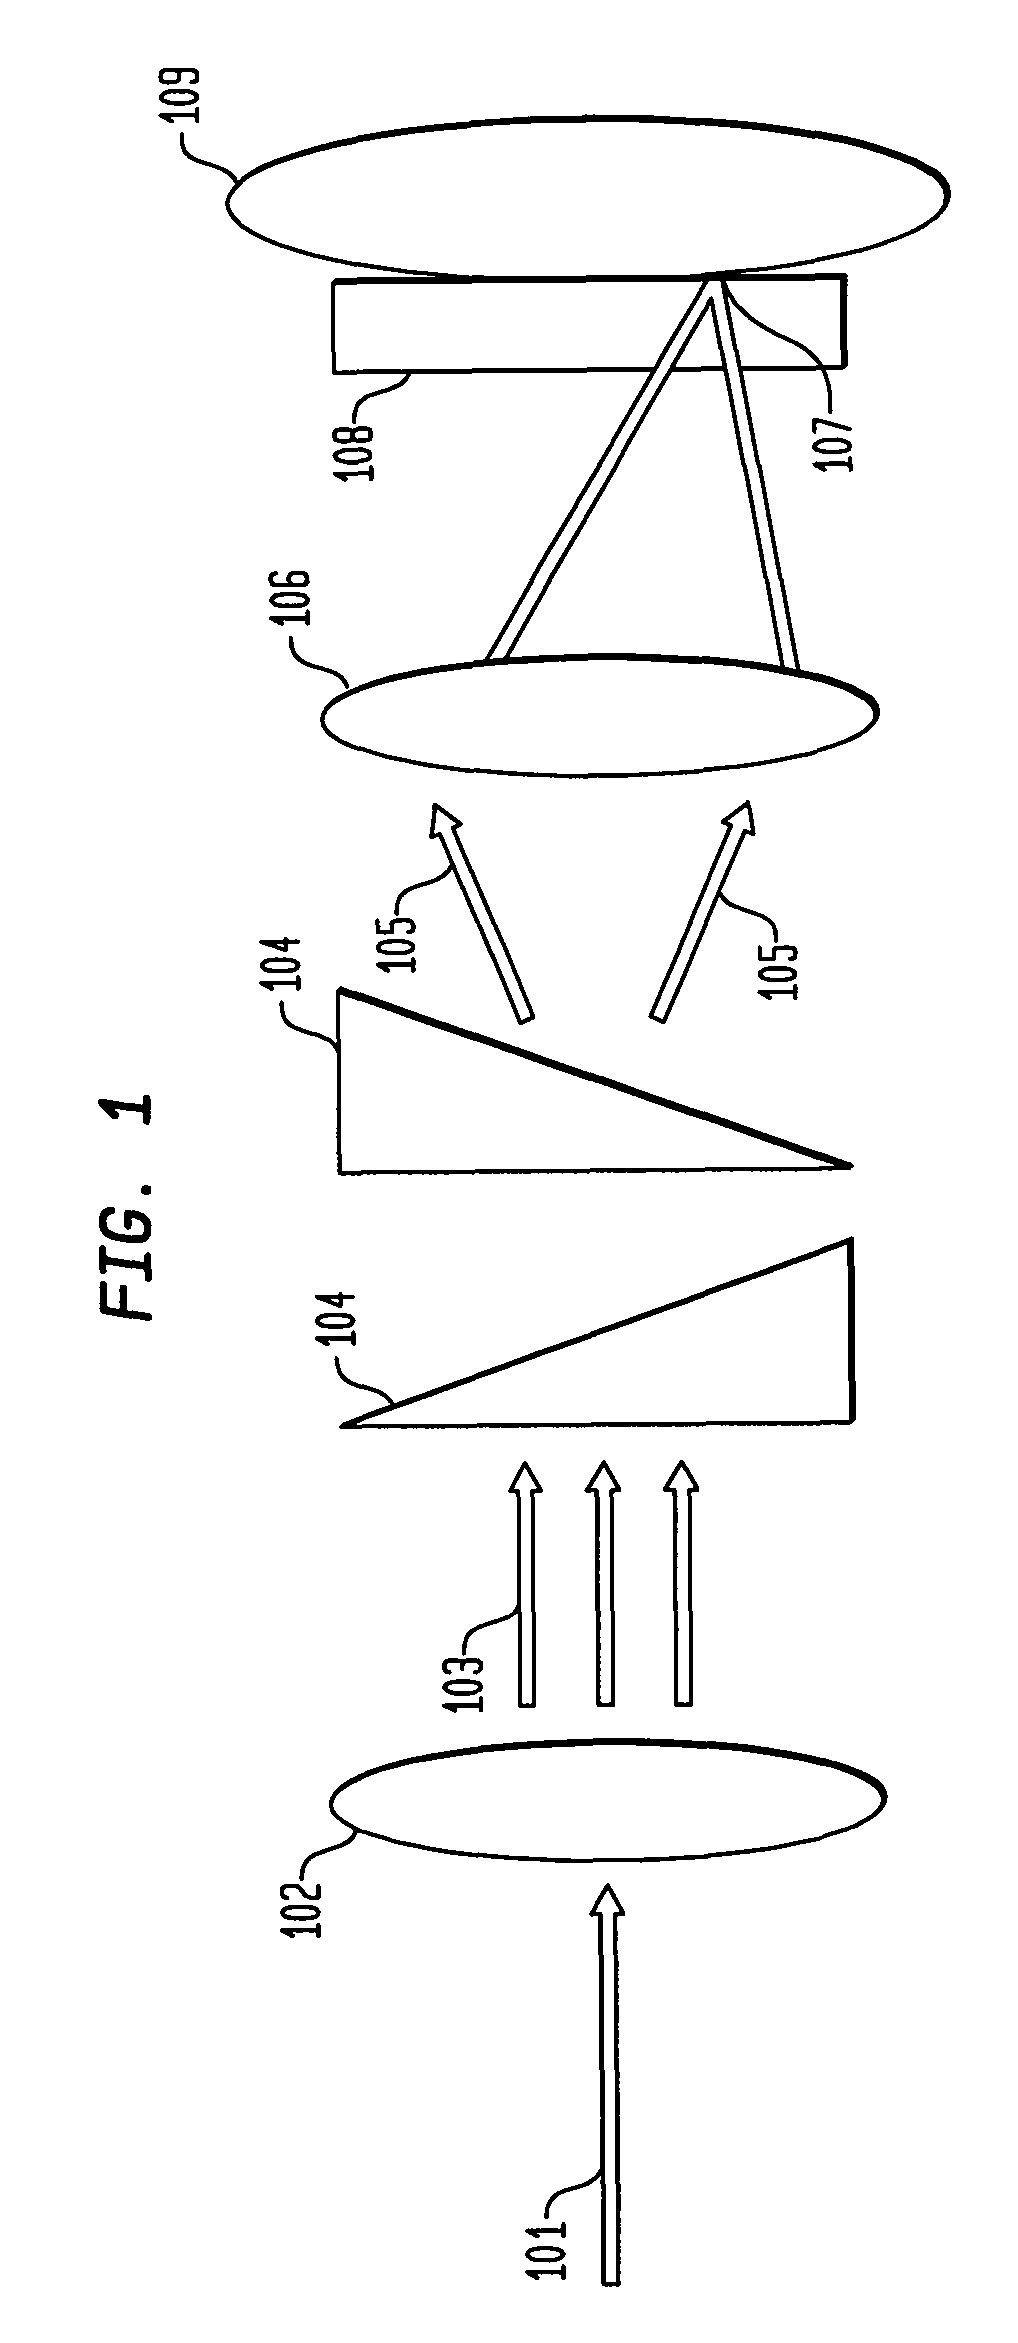 System and method for creating a stable optical interface